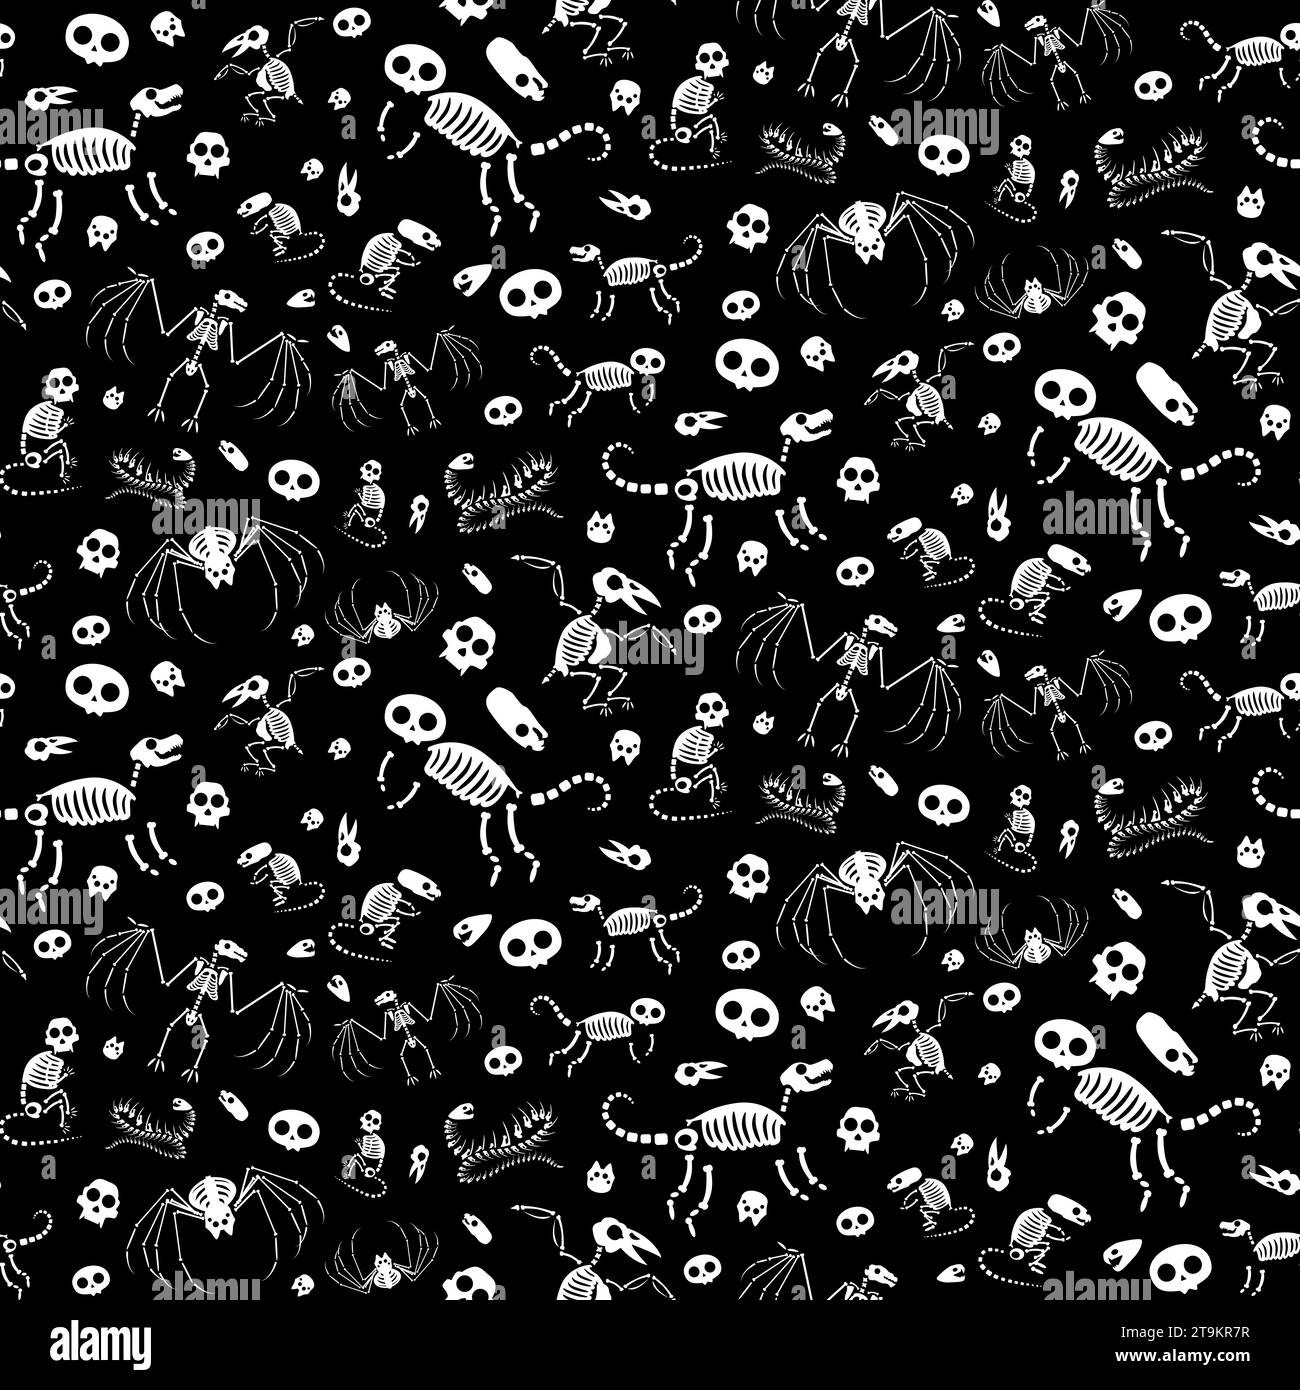 Black white Halloween seamless pattern with Animals Monster Skeletons. Roentgen skeleton bones, fairy tale characters. Ornament for printing on fabric Stock Vector